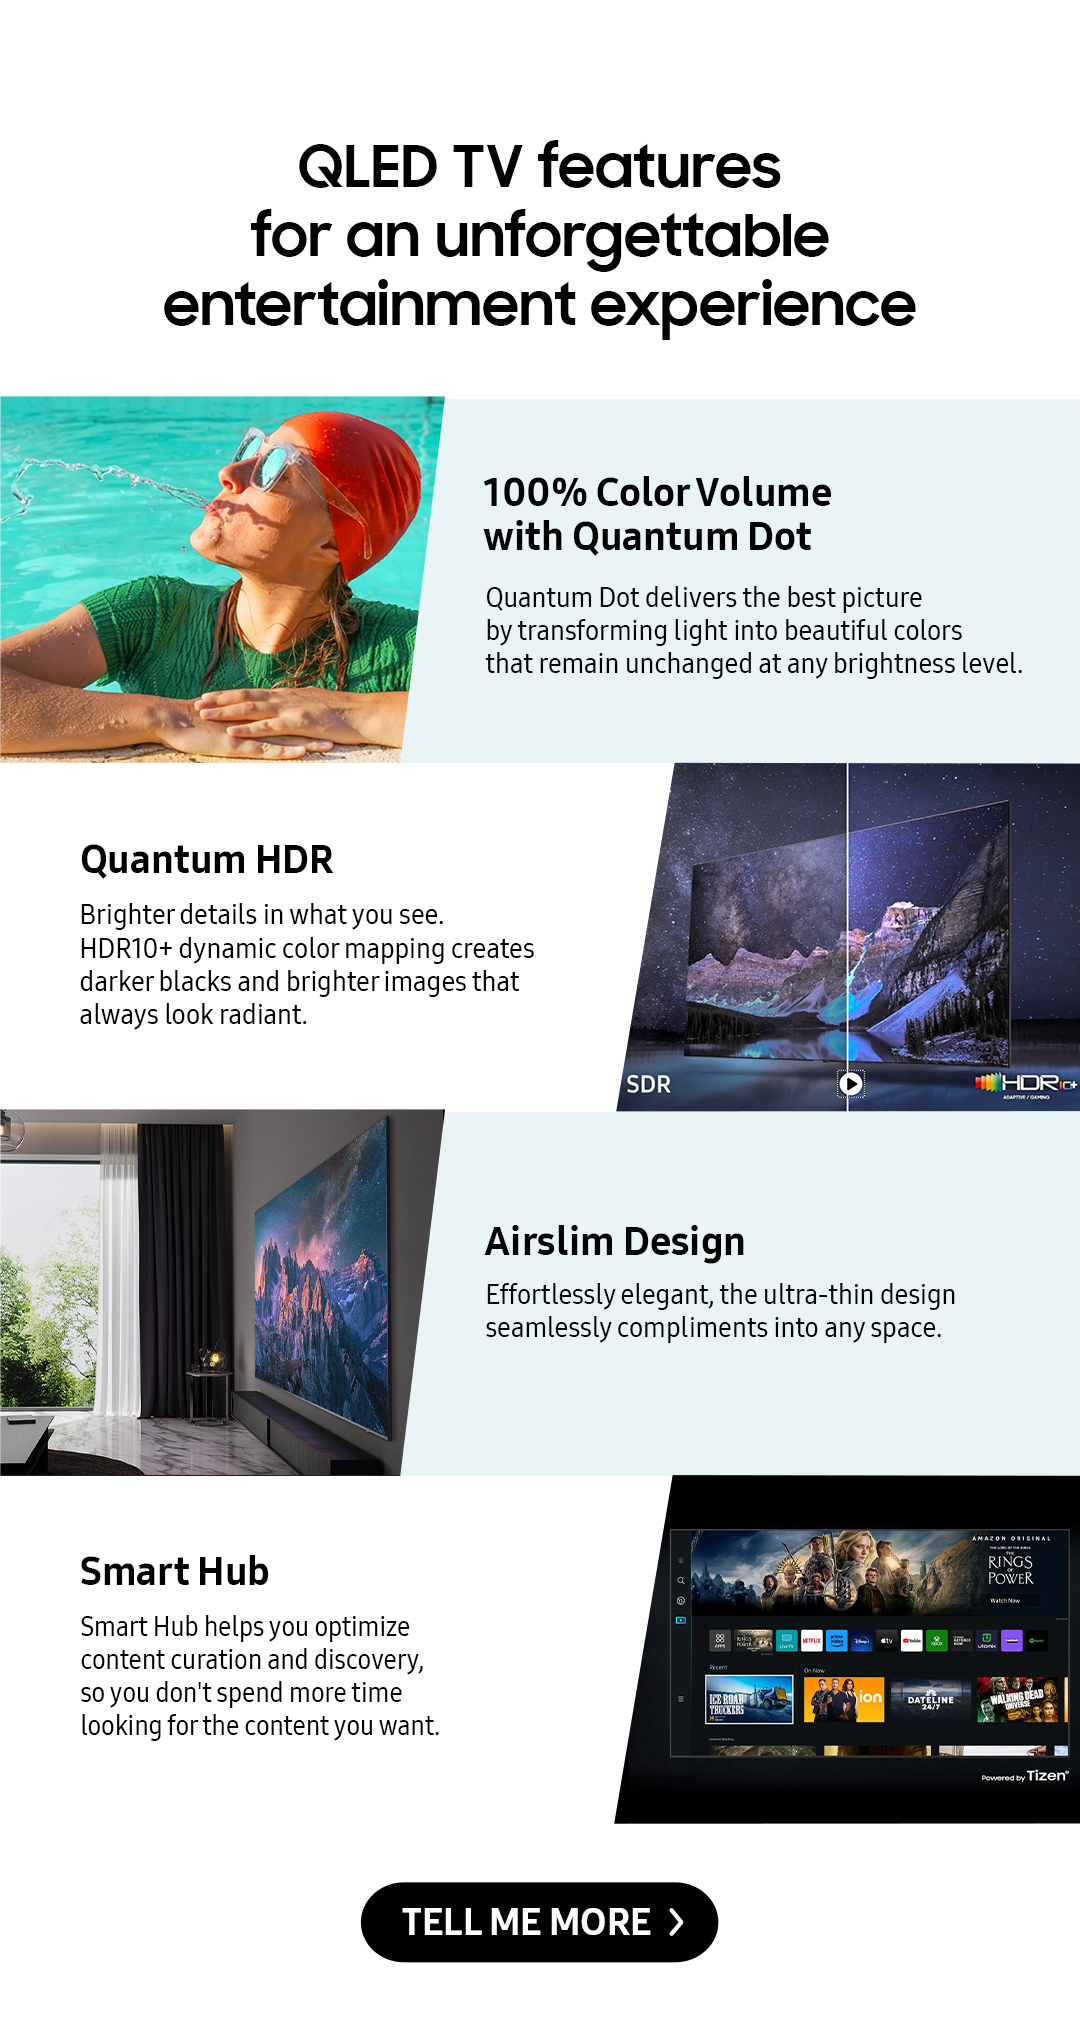 QLED TV features for an unforgettable entertainment experience